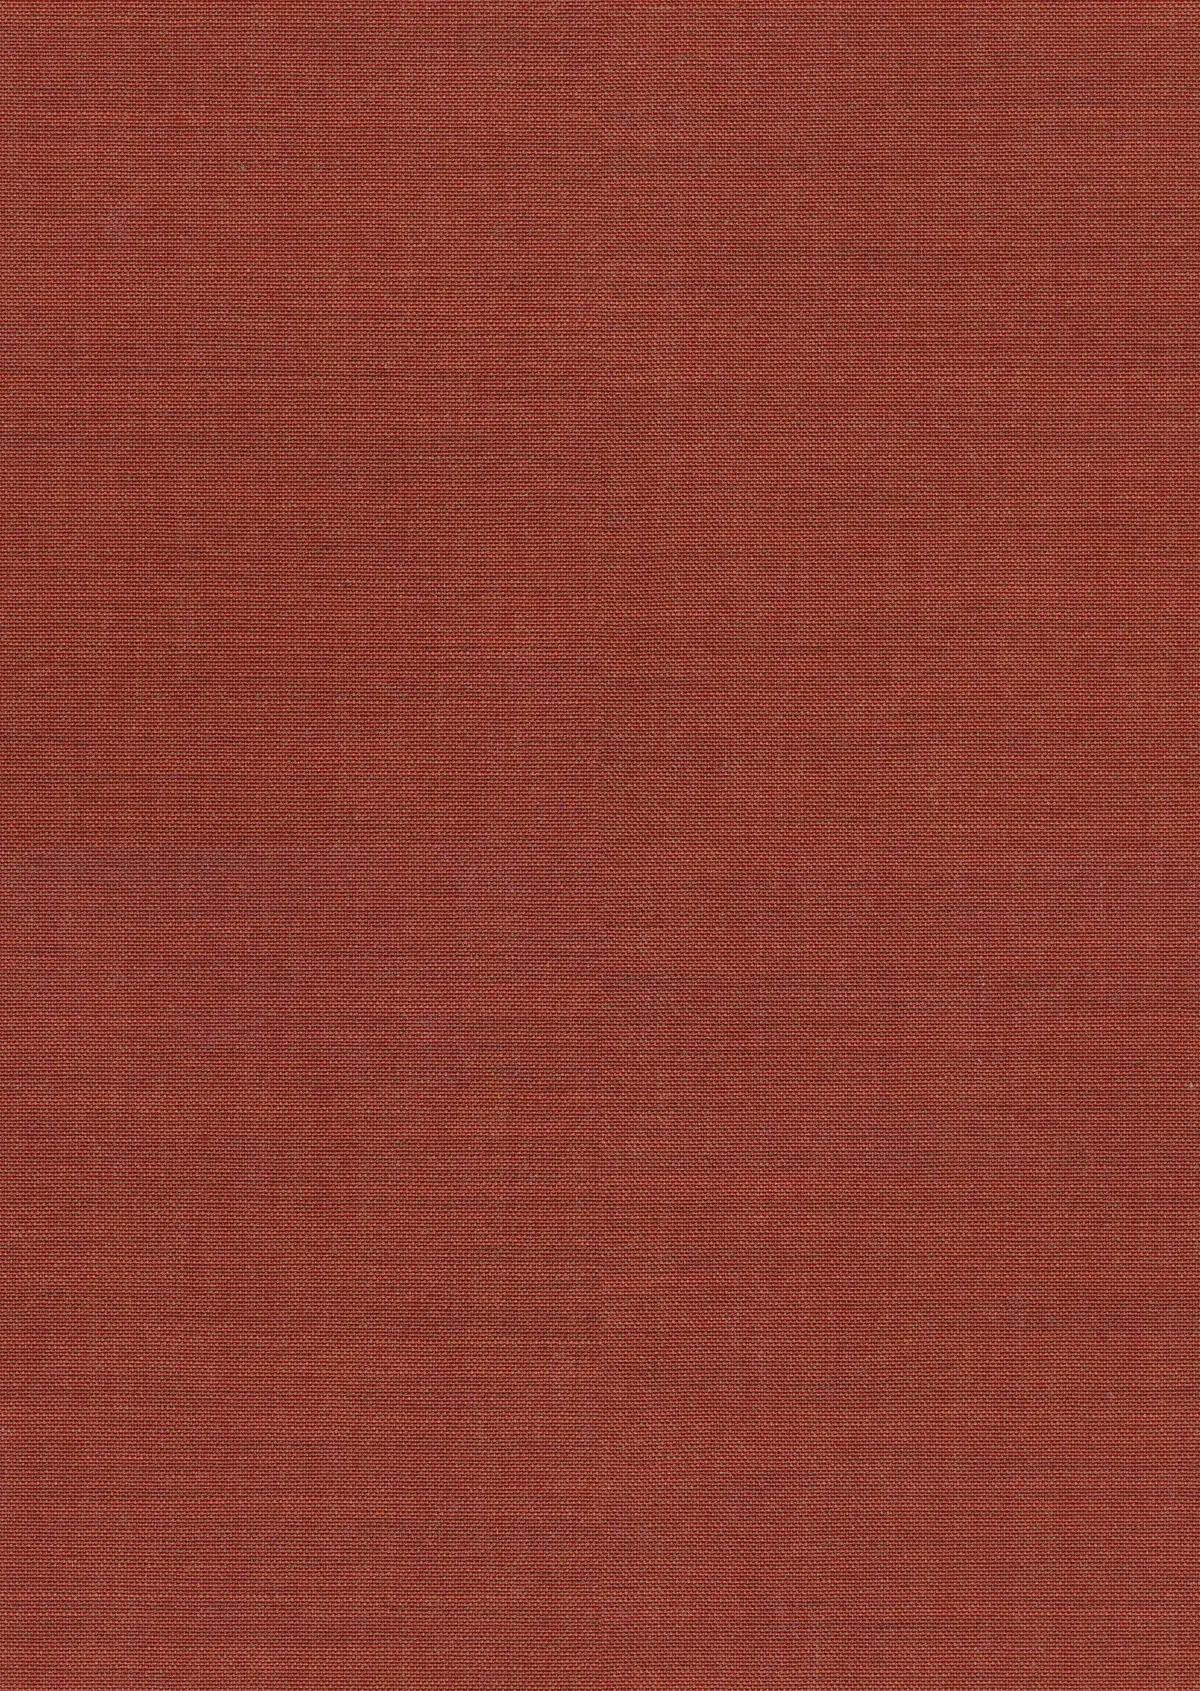 Fabric sample Remix 3 632 red